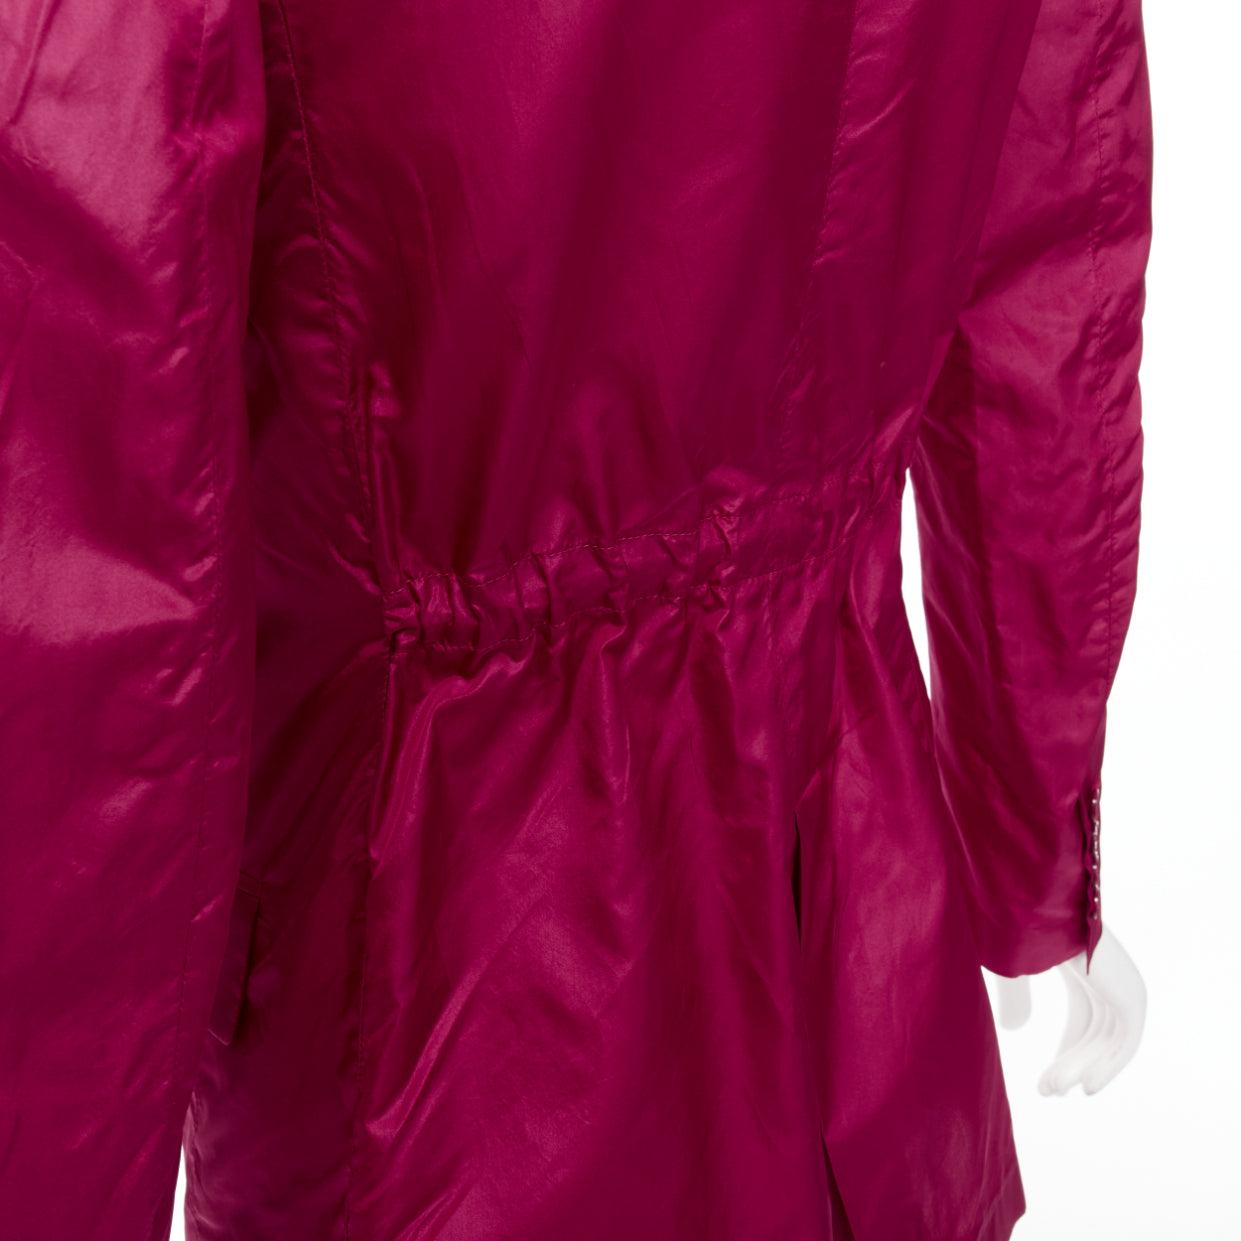 VALENTINO Piccioli 100% silk raspberry pink cinched waist casual blazer IT36 XXS
Reference: AAWC/A00716
Brand: Valentino
Designer: Pier Paolo Piccioli
Material: Silk
Color: Purple
Pattern: Solid
Closure: Button
Extra Details: V logo buttons.
Made